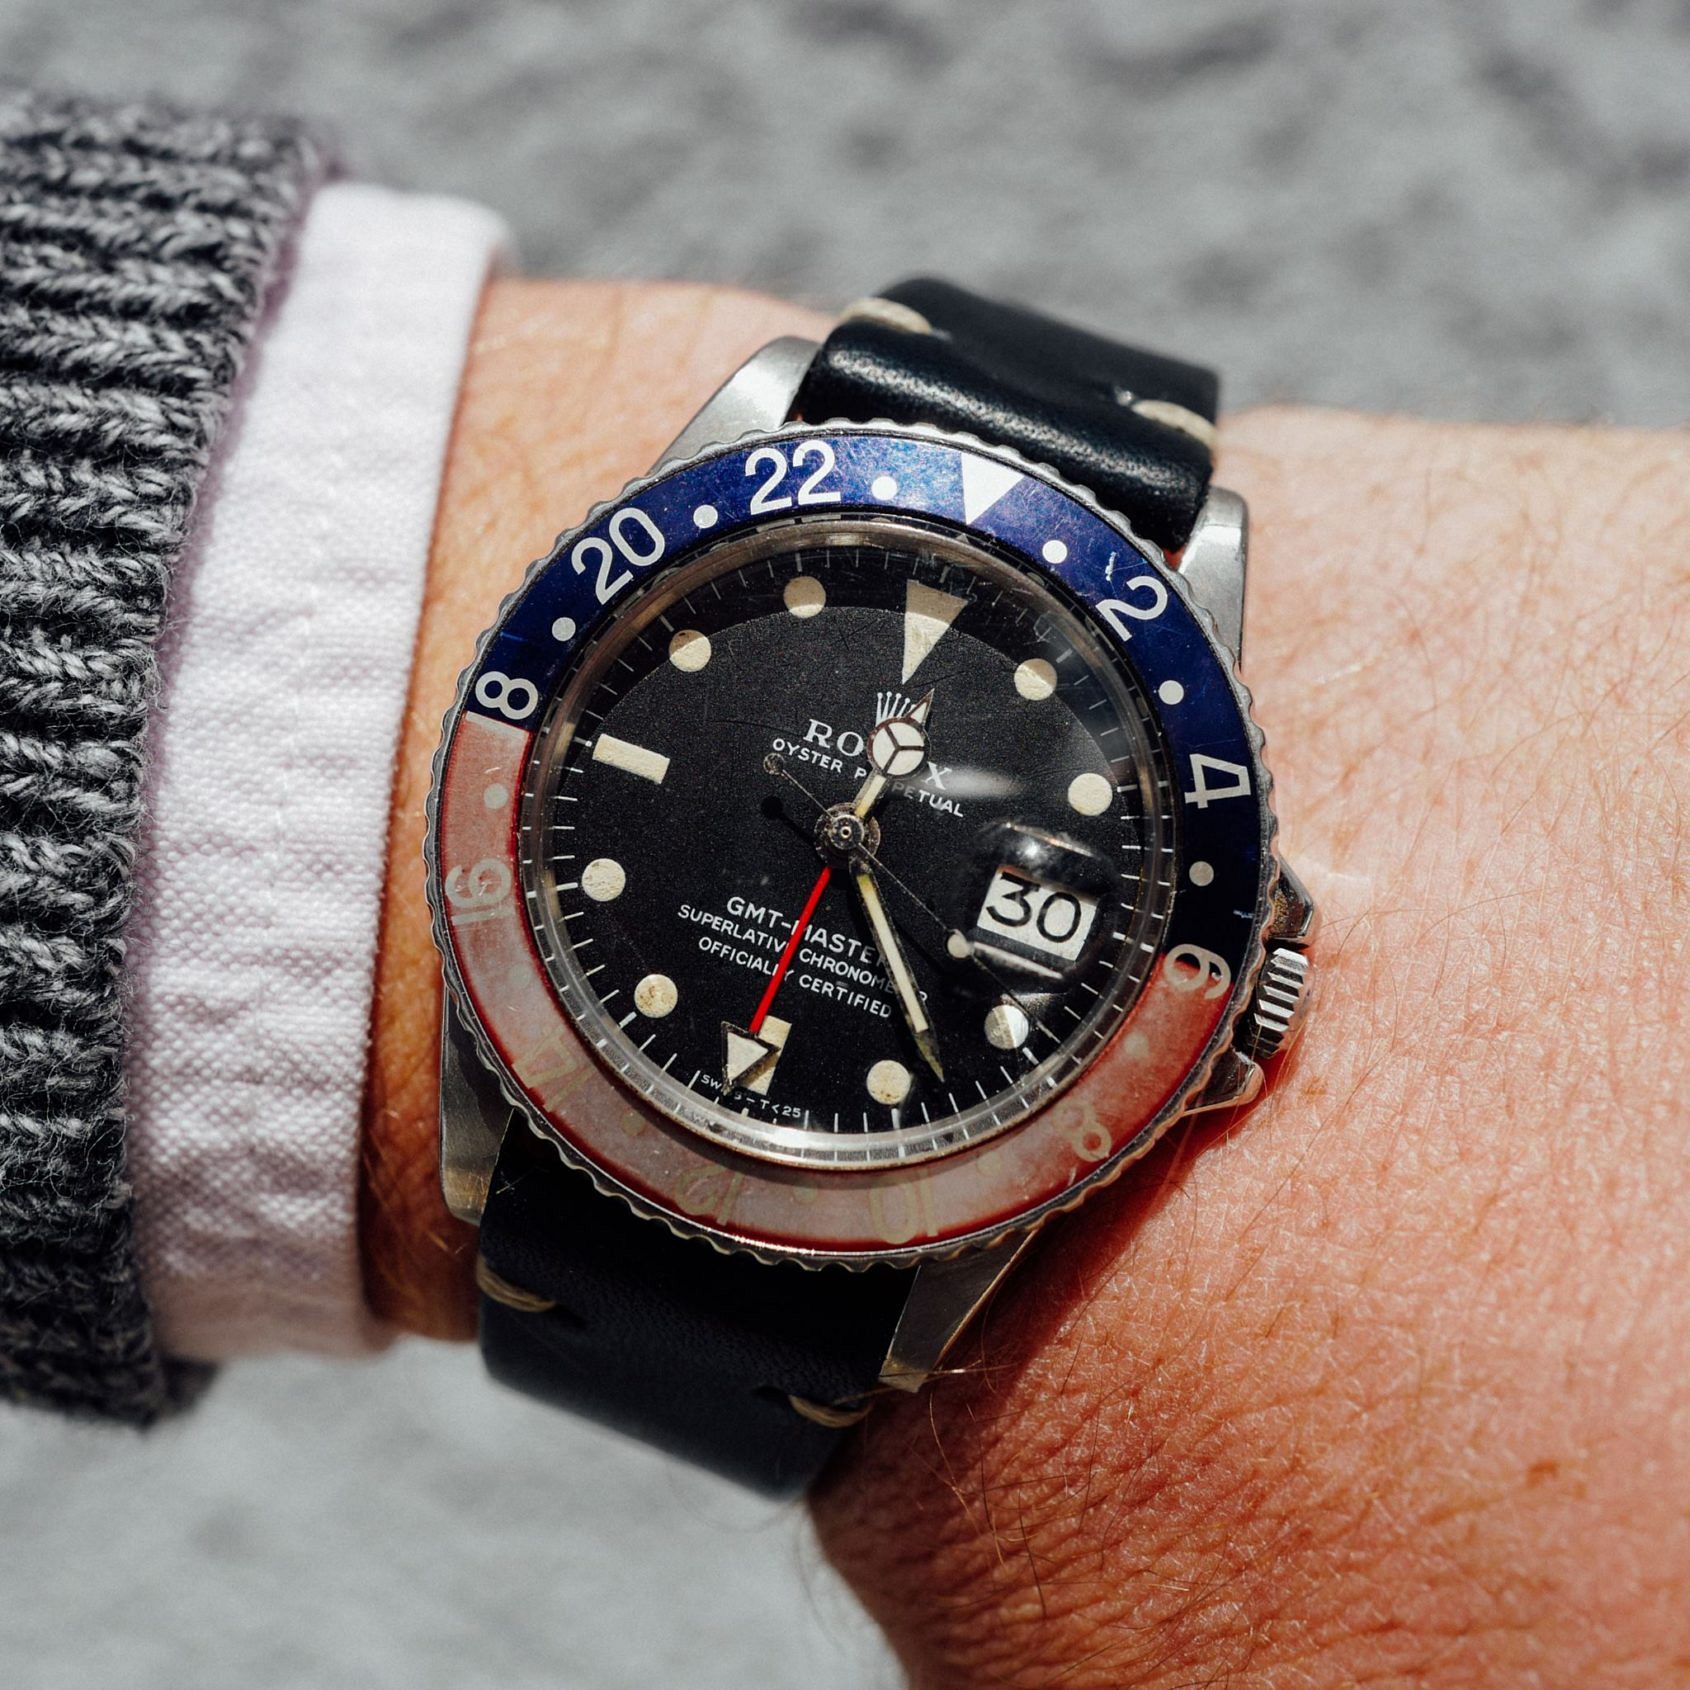 MY HIGHT QUALITY  REPLICA WATCH STORY: Ted from Petrolicious and his Replica Rolex GMT Master 1675